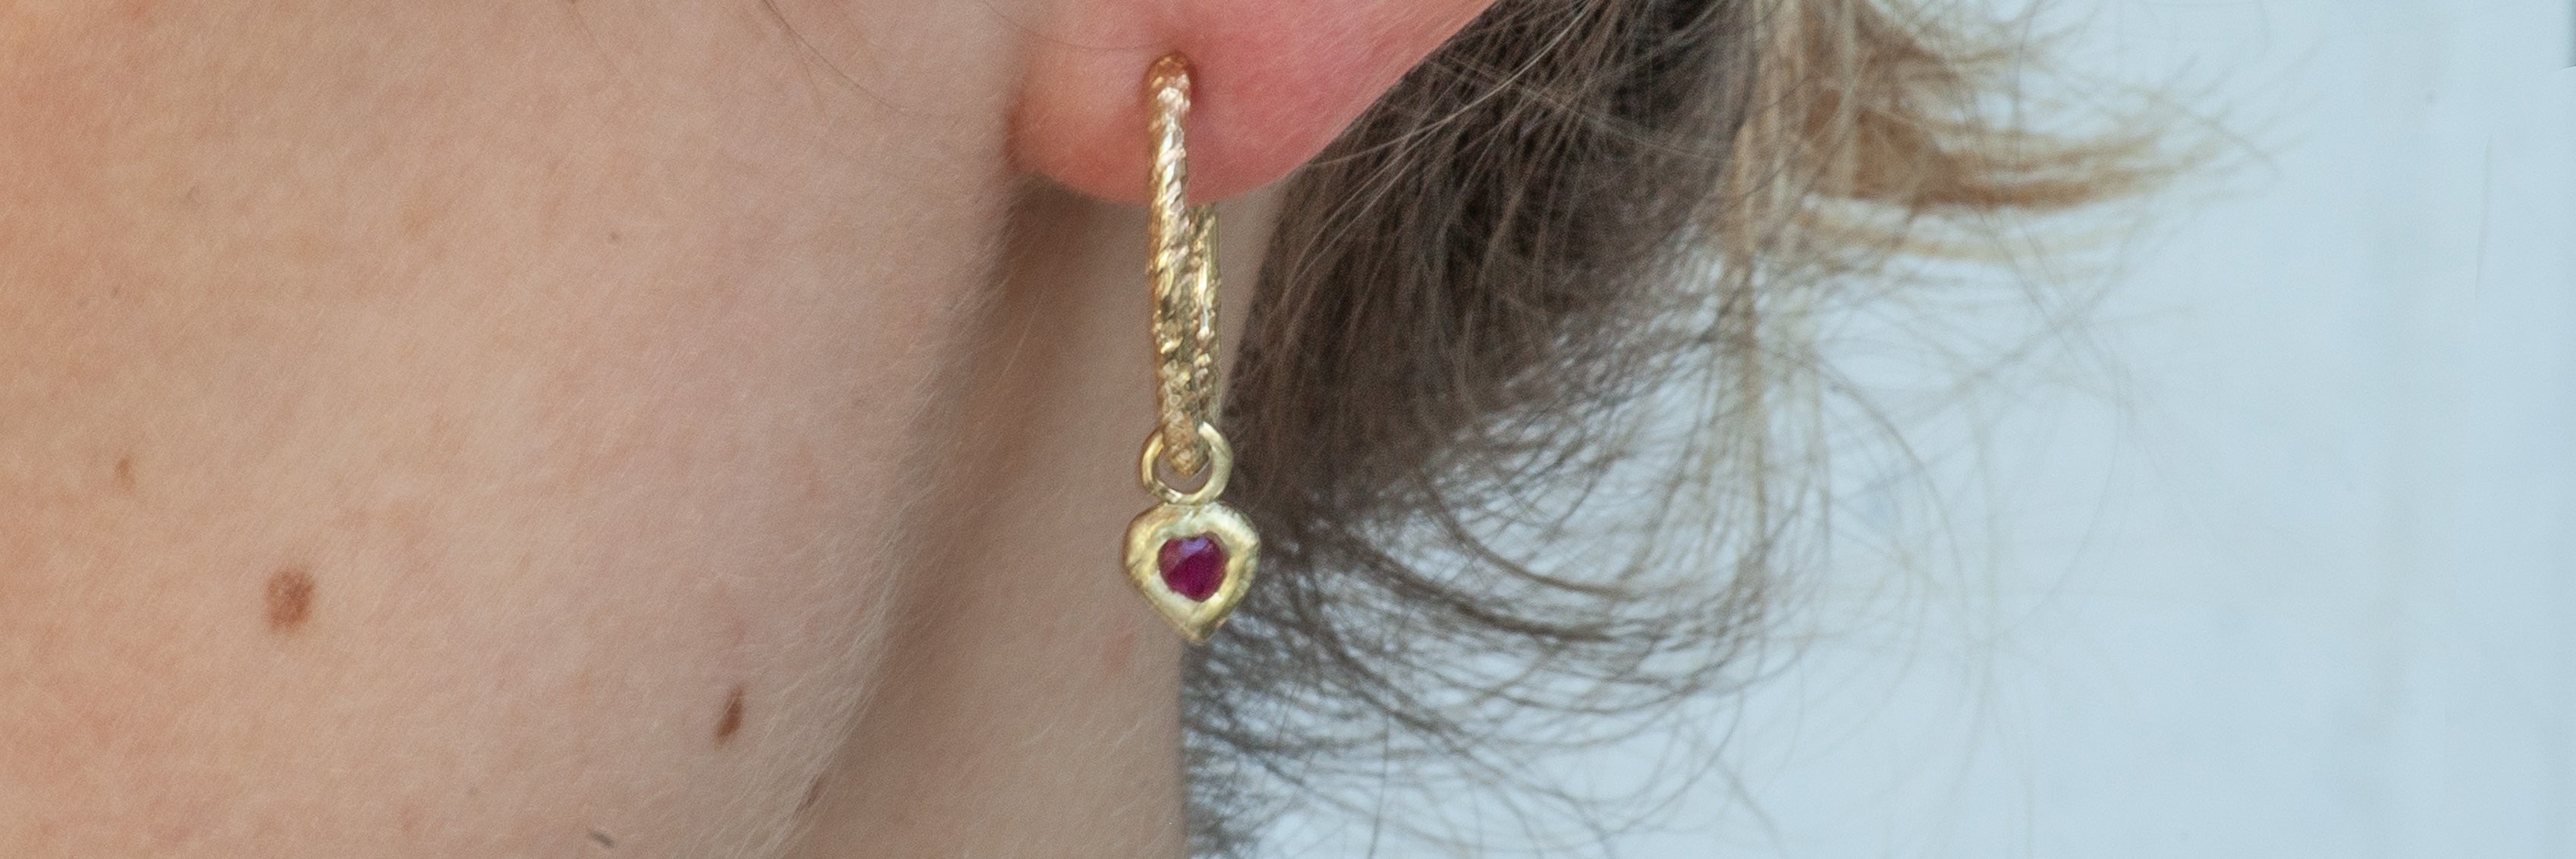 Solid gold earrings made from recycled 9ct gold, studs, hoops and drop earrings ethically handmade in the UK by Amulette